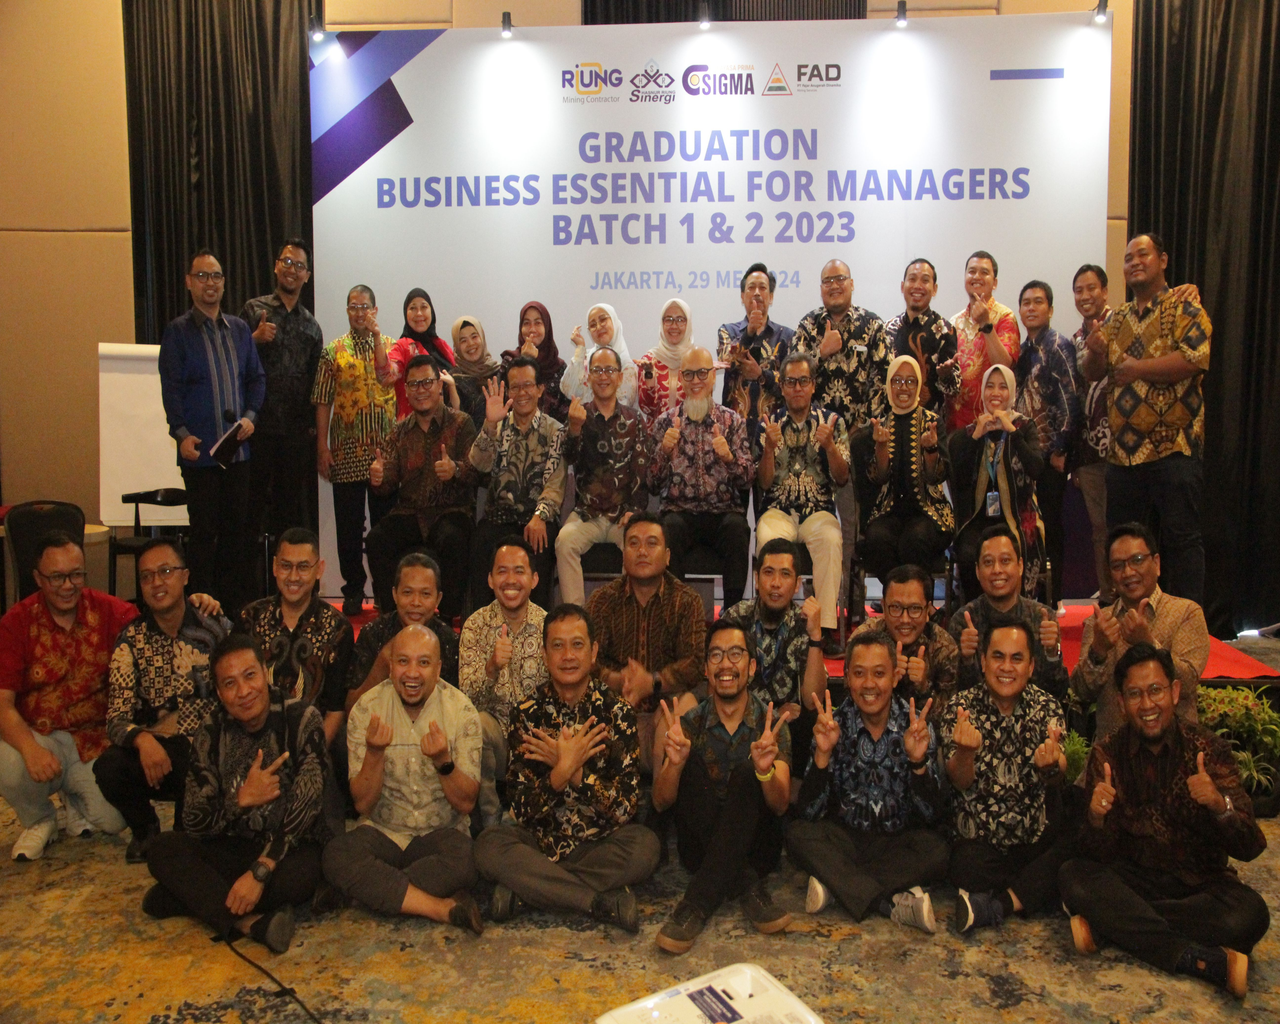 Graduation Ceremony Business Essential for Managers Hasnur Group